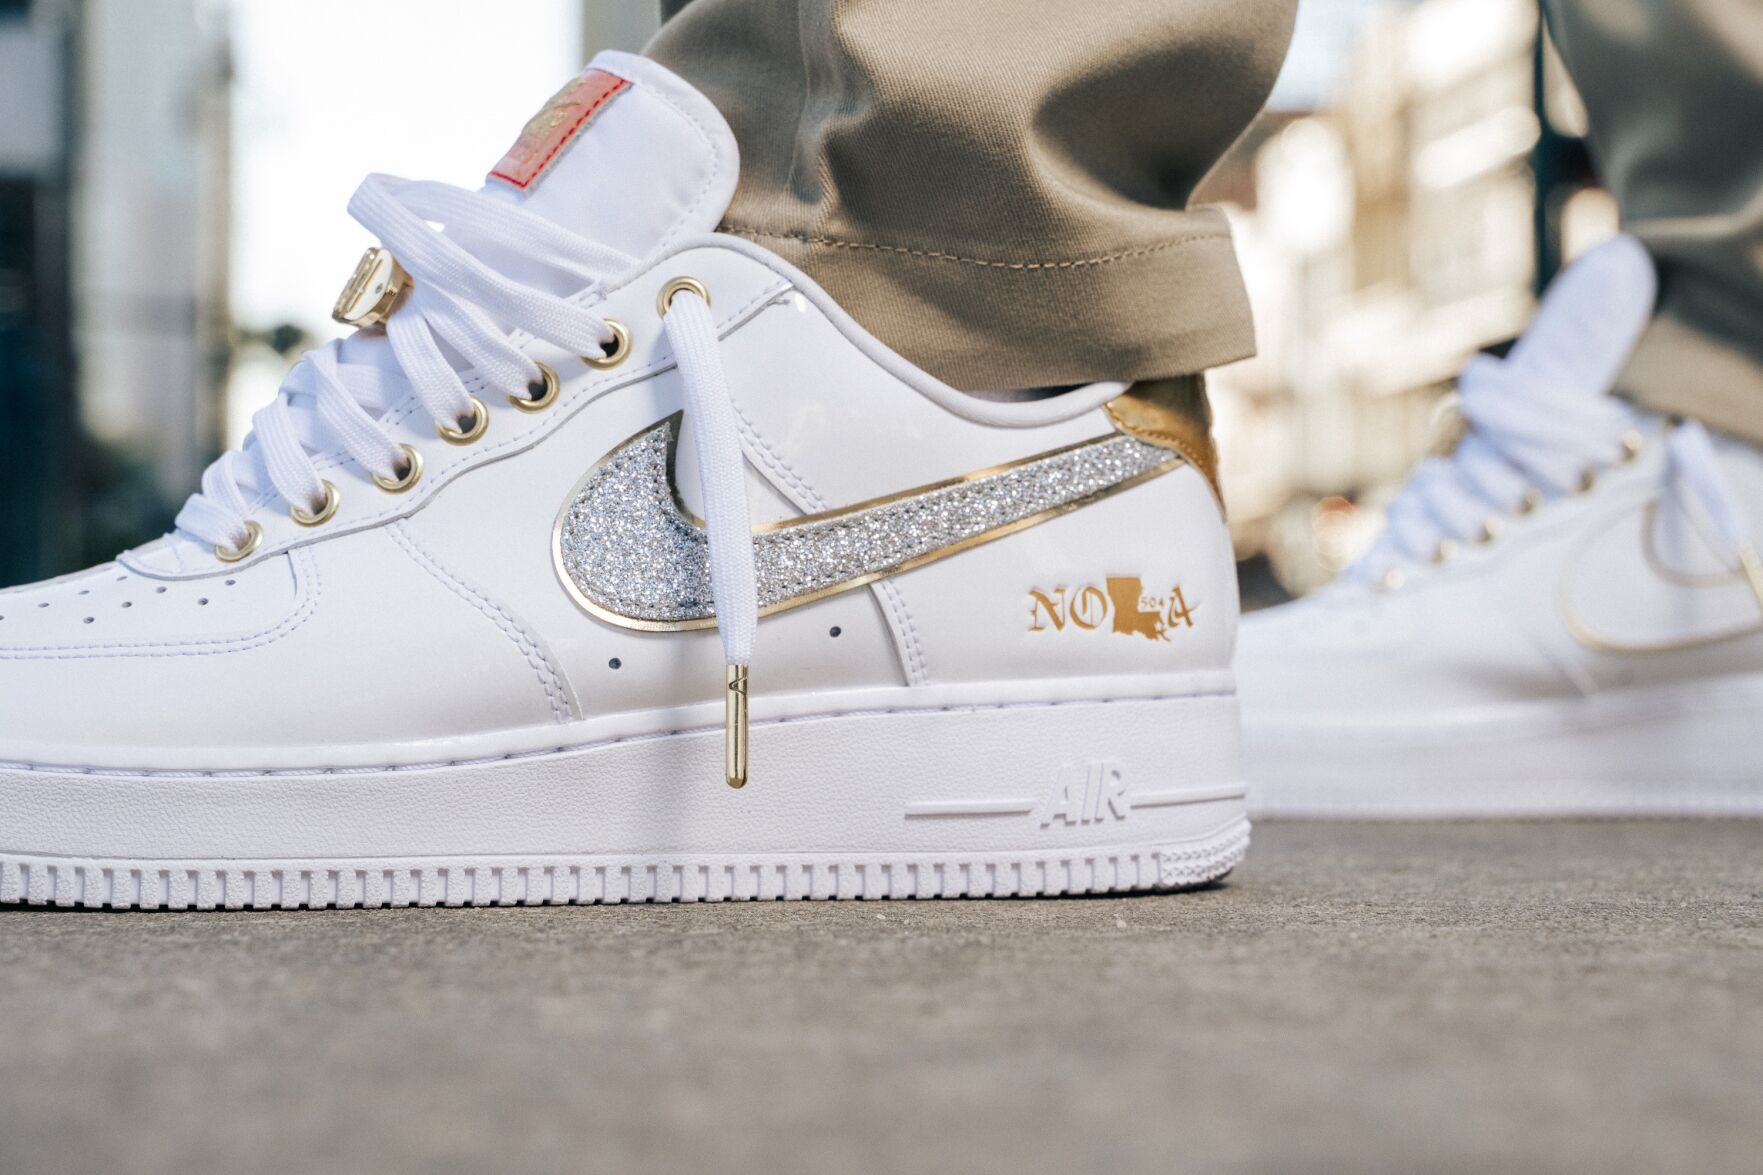 shoe stores that have air force 1